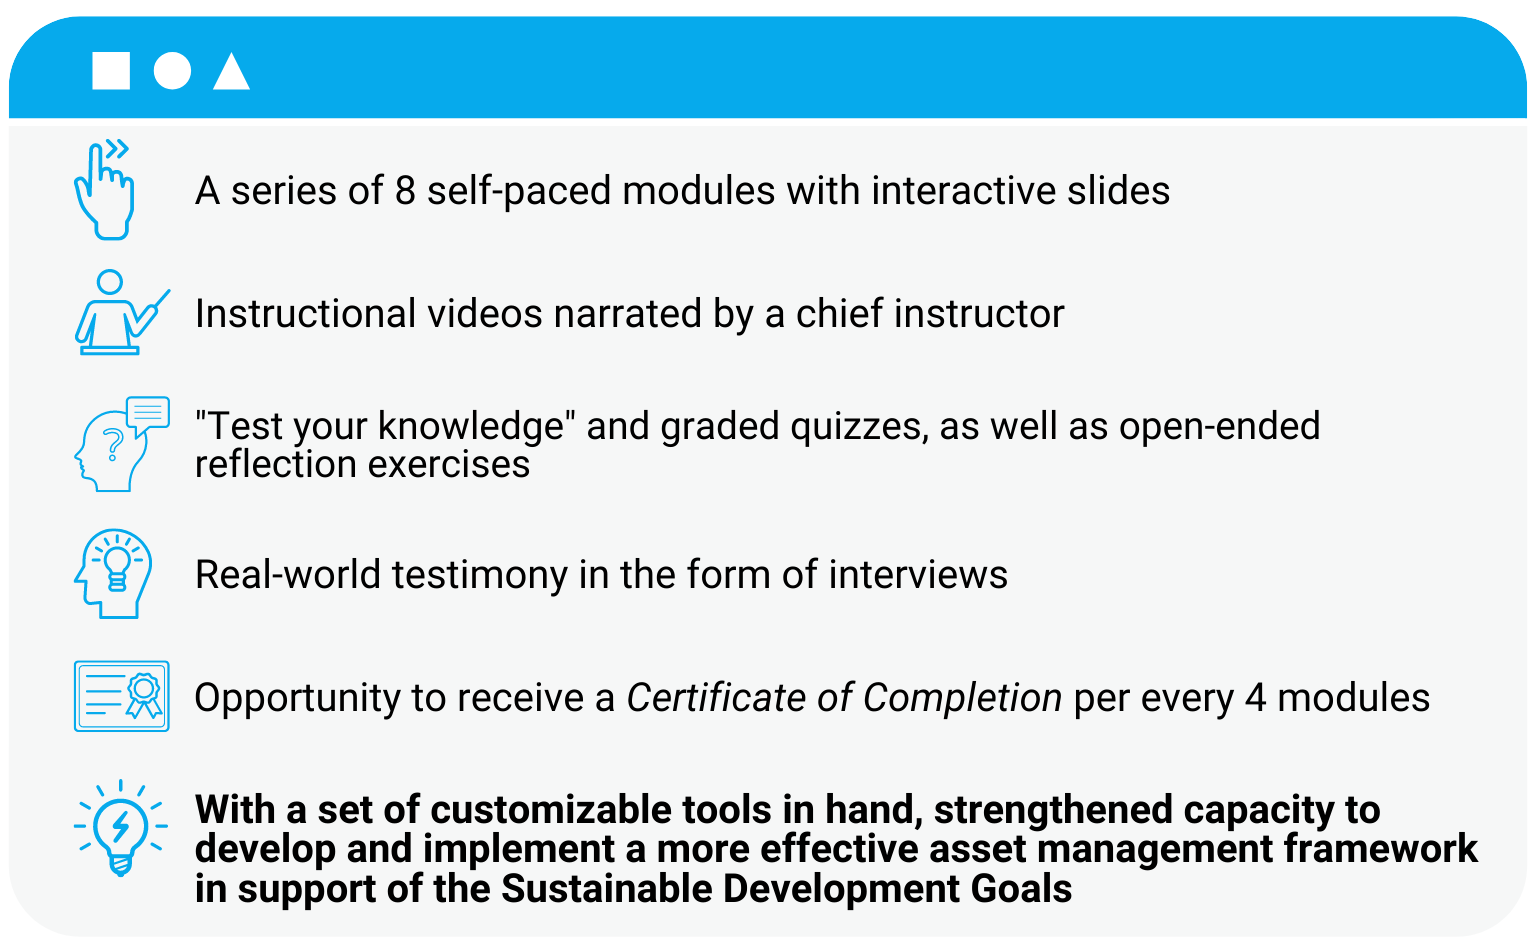 List of features in the IAM MOOC